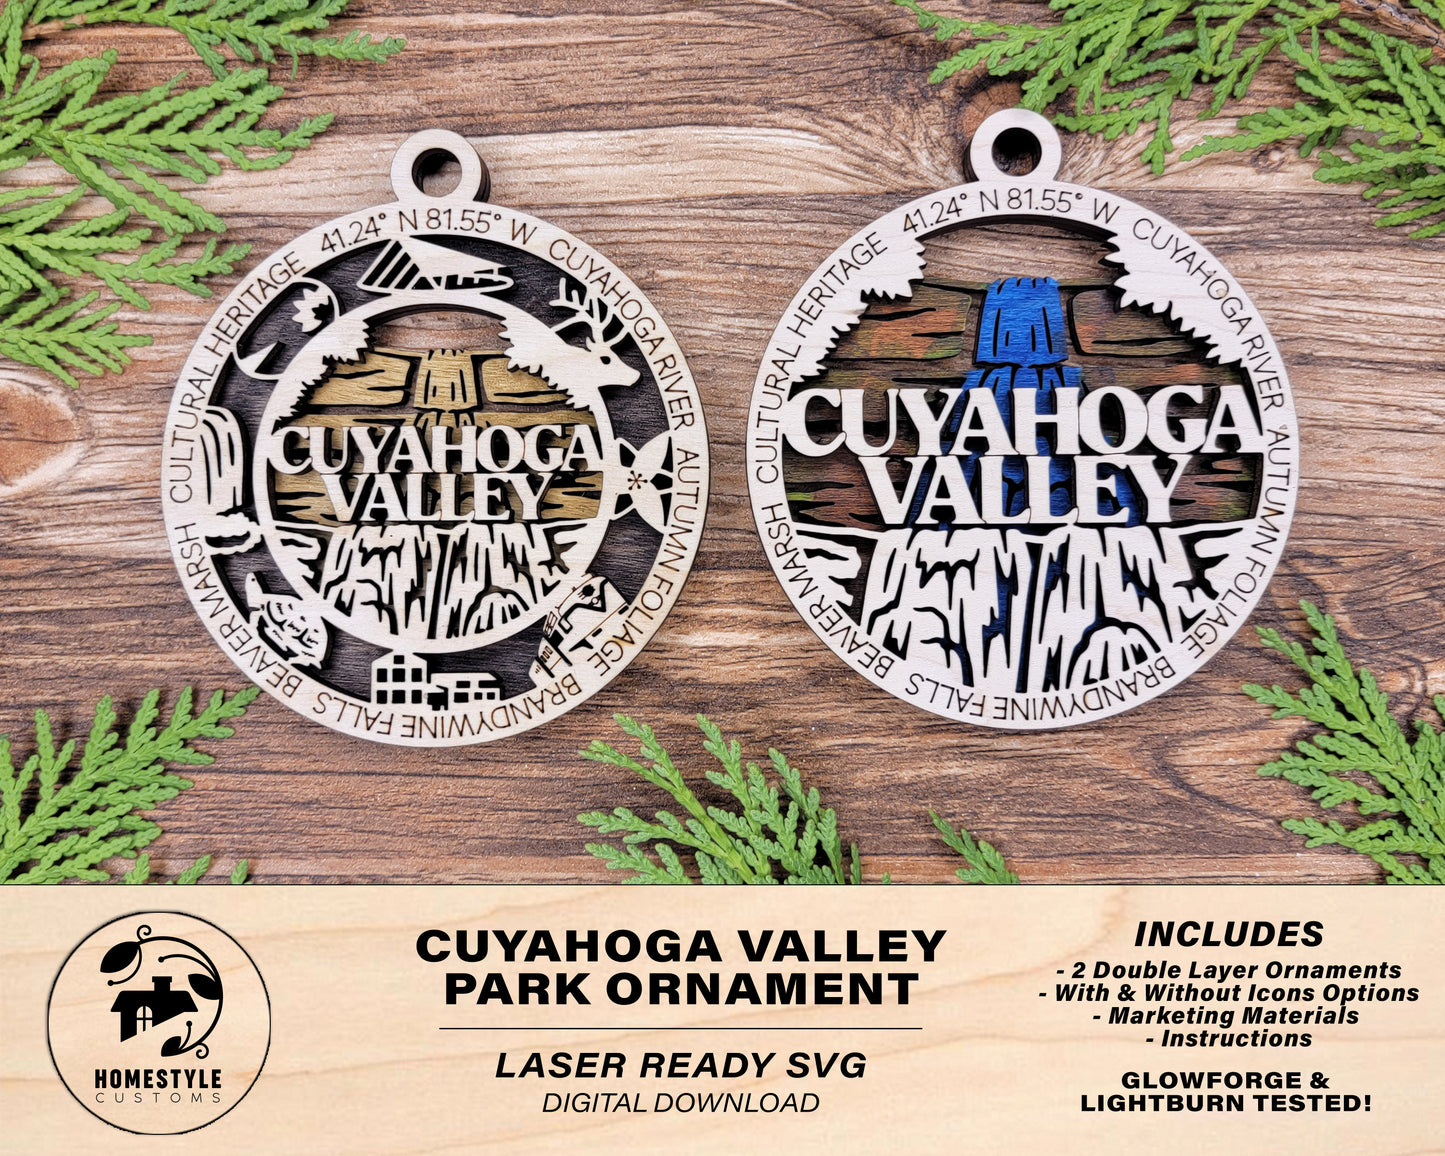 Cuyahoga Valley Park Ornament - Includes 2 Ornaments - Laser Design SVG, PDF, AI File Download - Tested On Glowforge and LightBurn